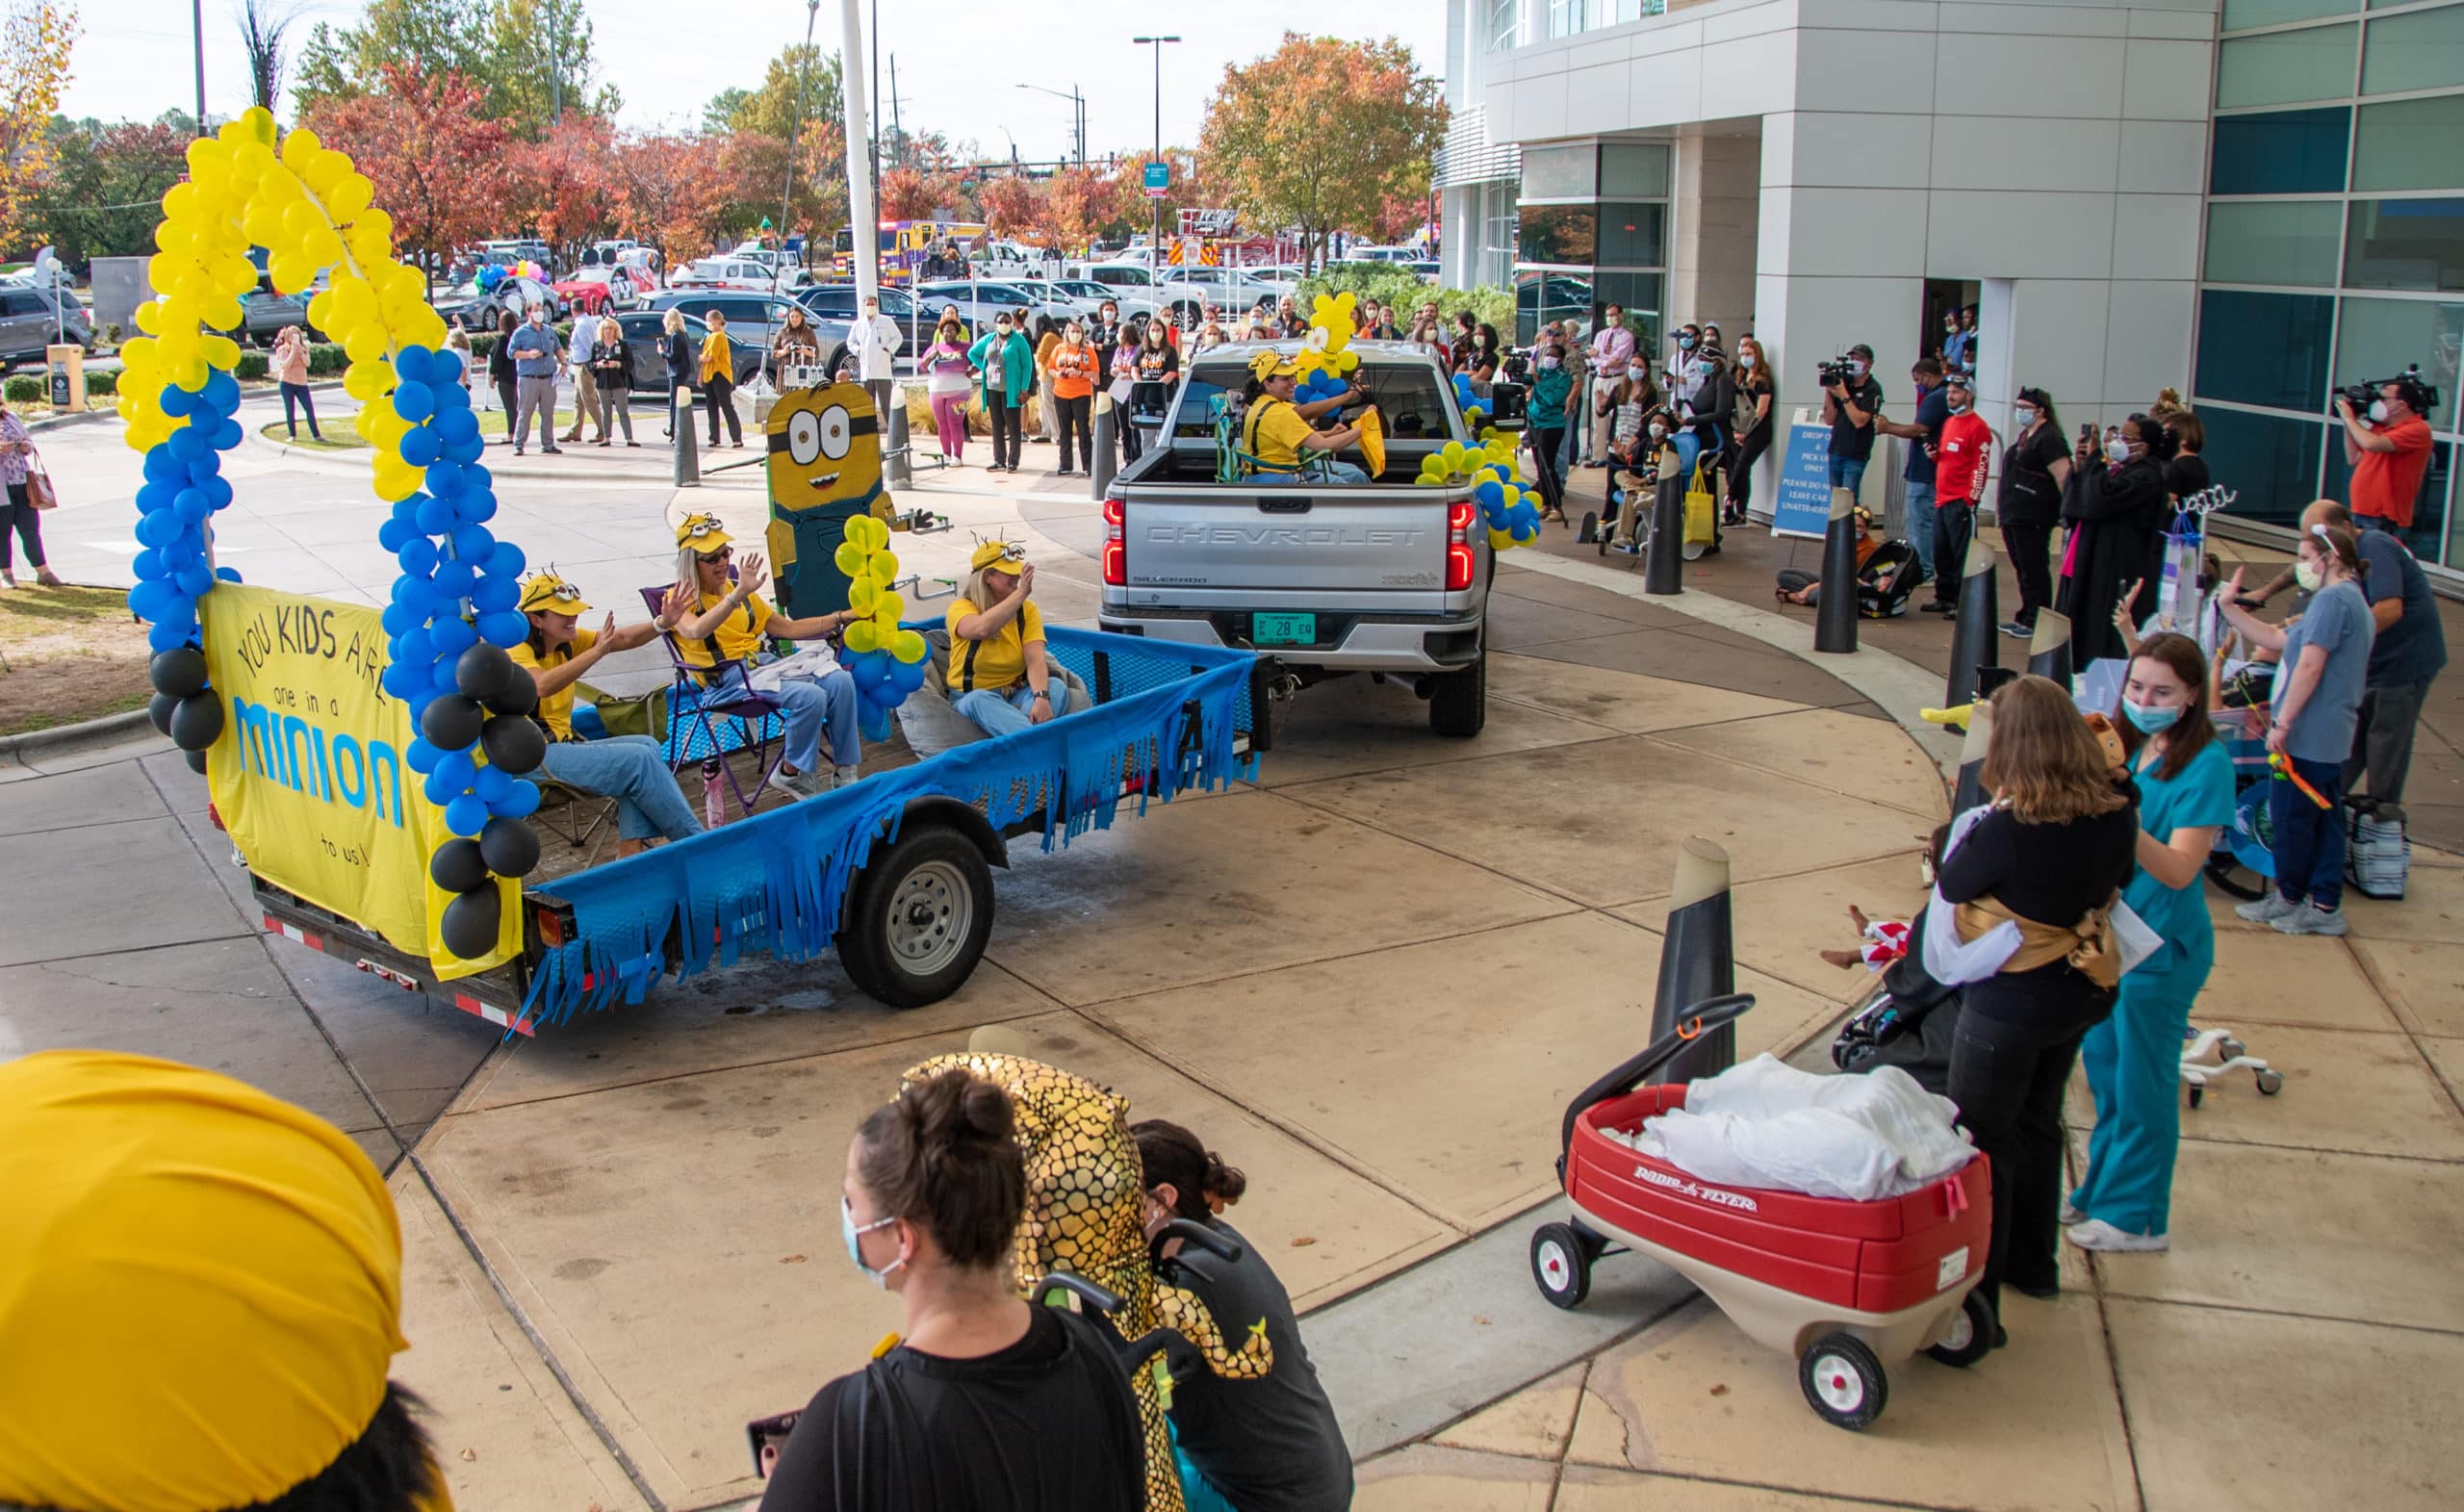 A truck pulls a trailer of ECU Health team members dressed as Minions during the Halloween Parade at Maynard Children's Hospital. The truck and trailer drives through the loop in front of the Maynard Children's Hospital. Along the outside, patients, families, team members and community members wave to the team members on the float.